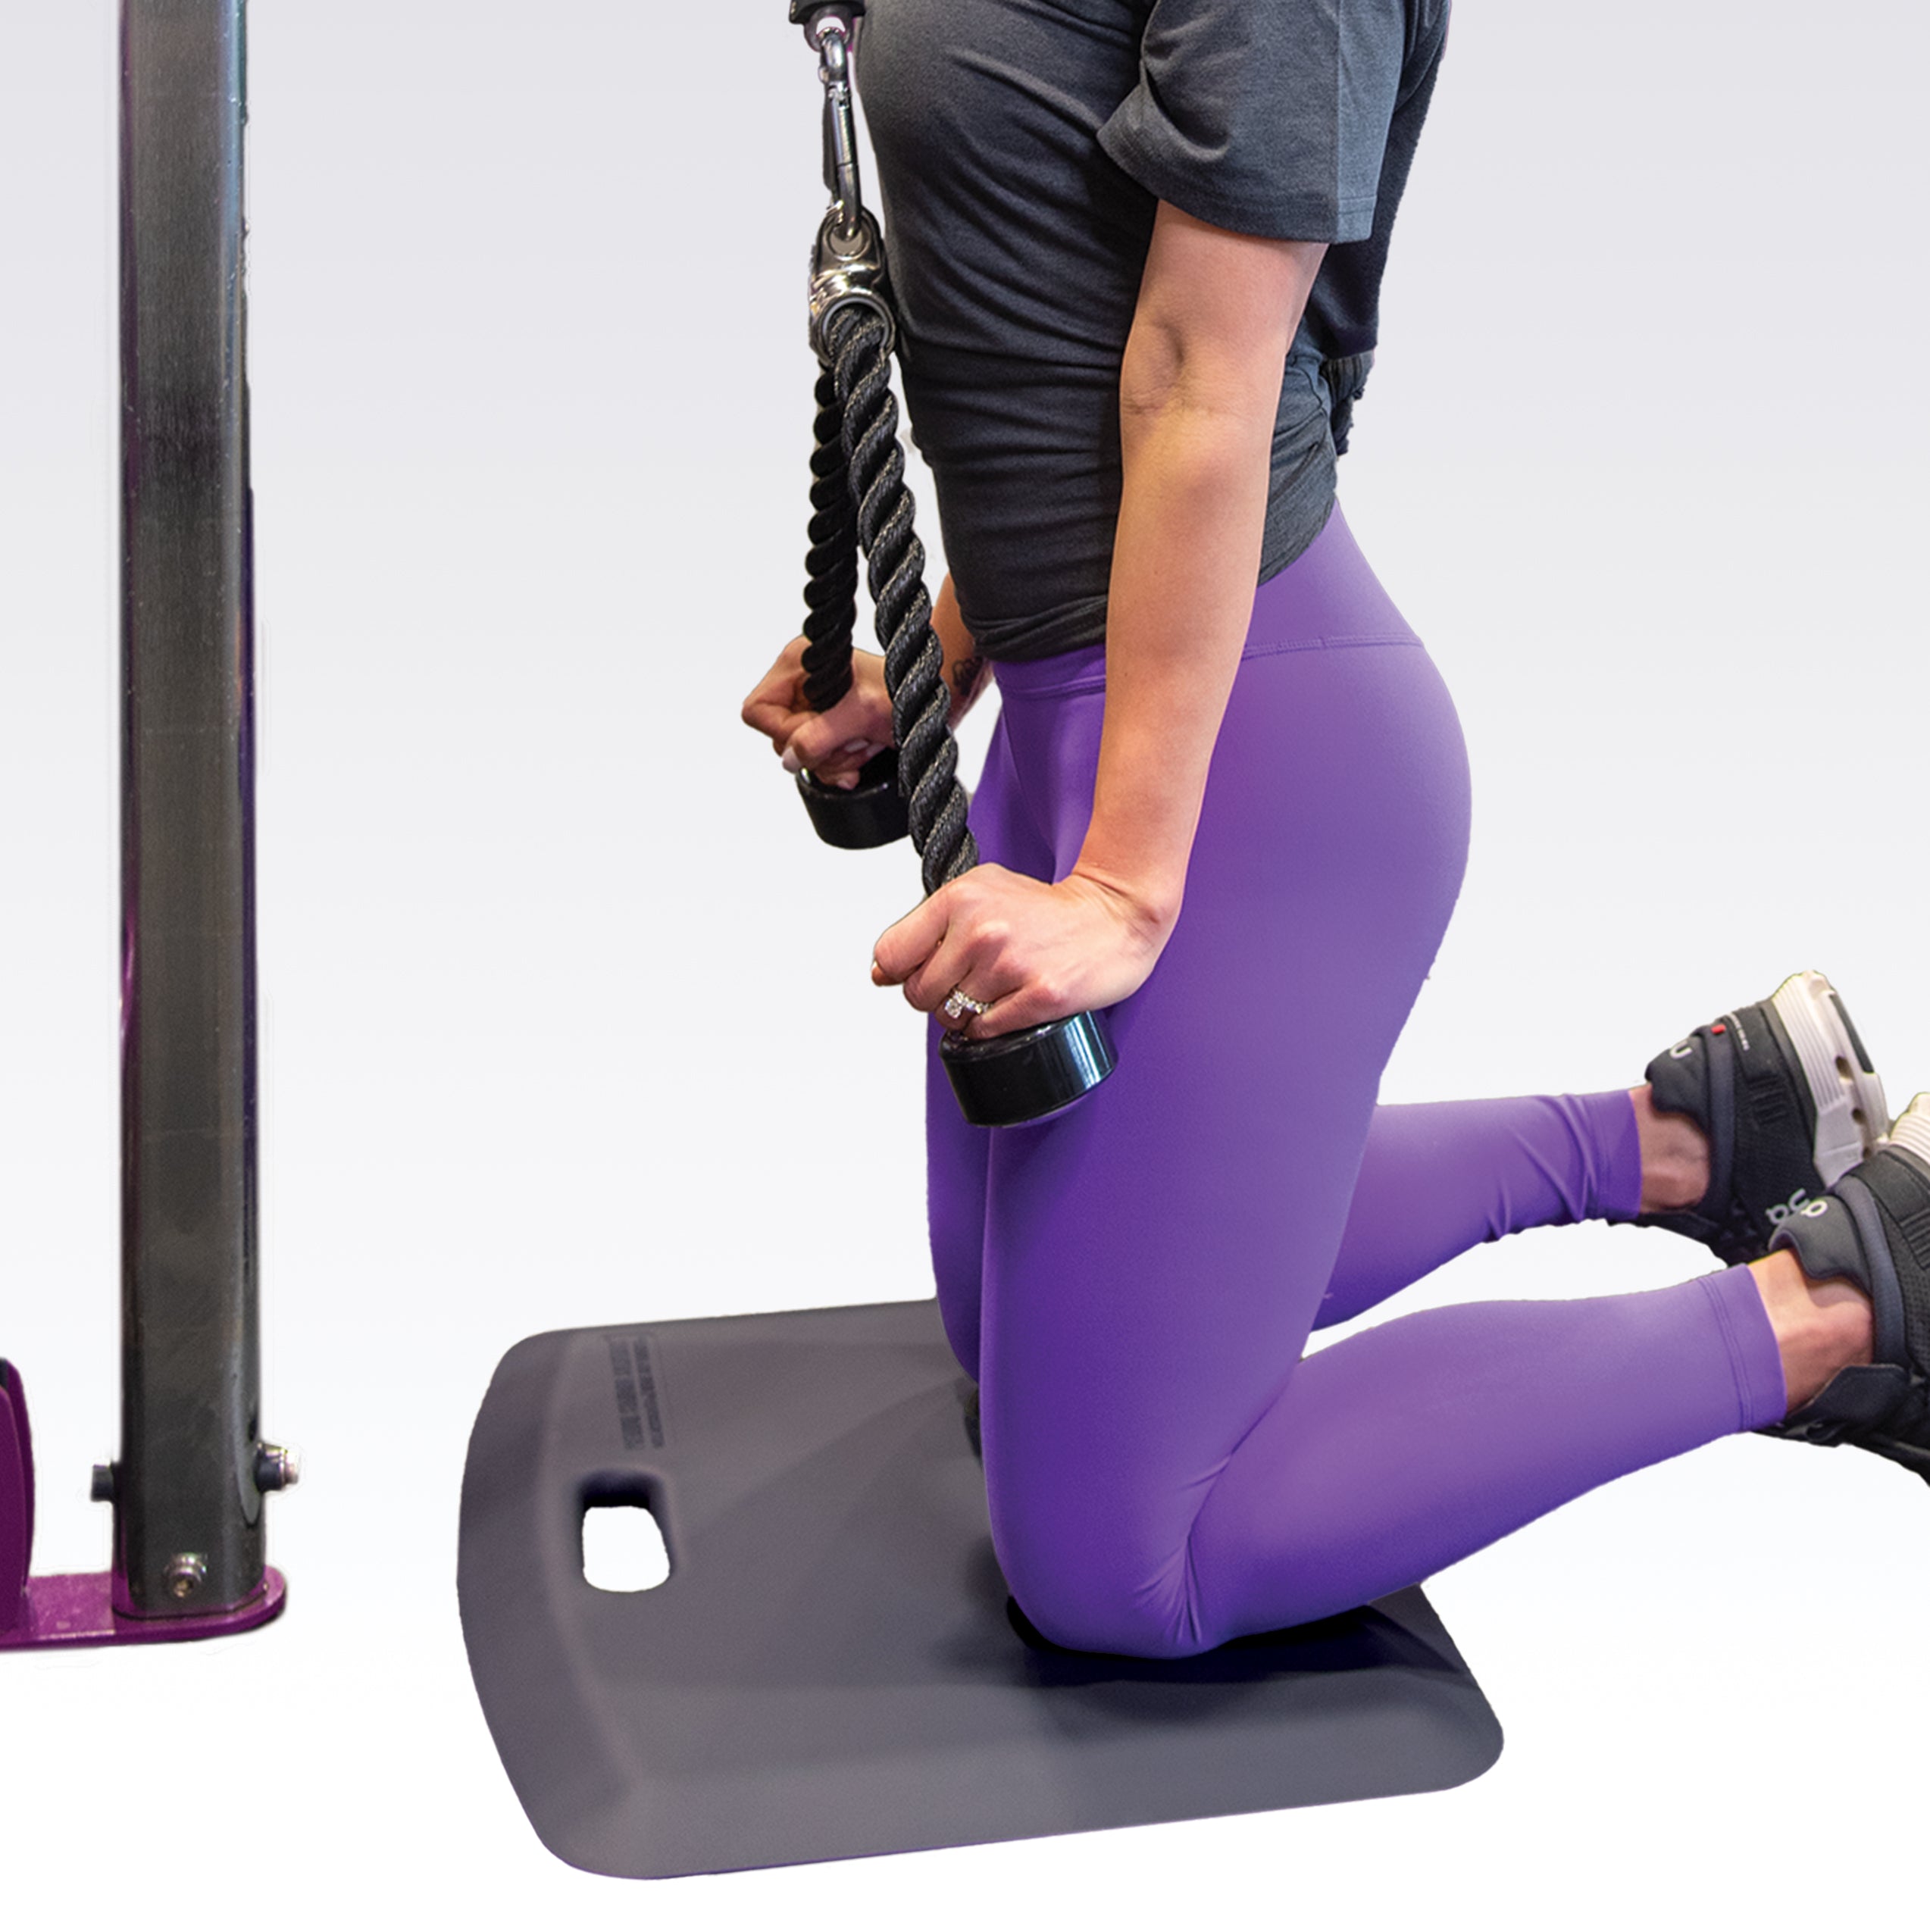 Woman doing triceps pulldowns kneeling on MobileMat.